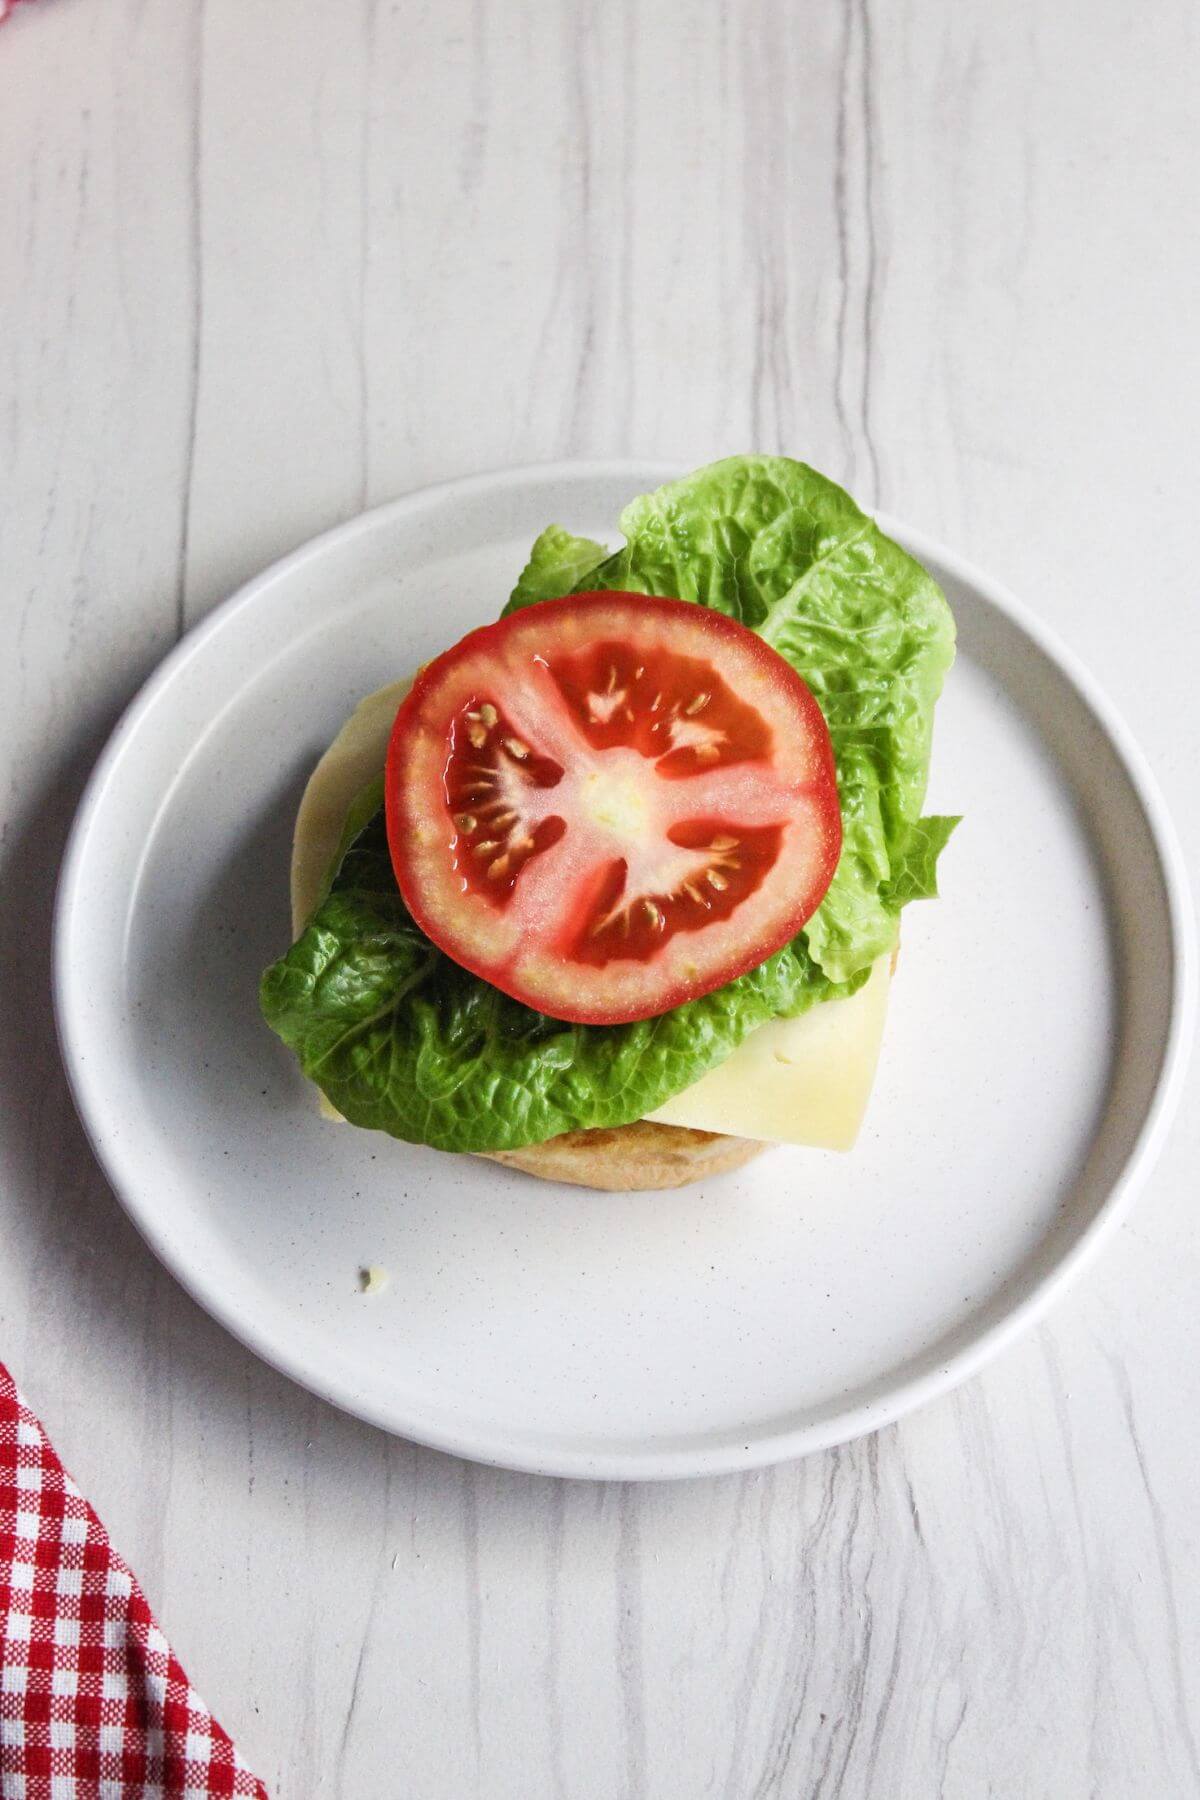 A burger with lettuce and tomato on a plate.